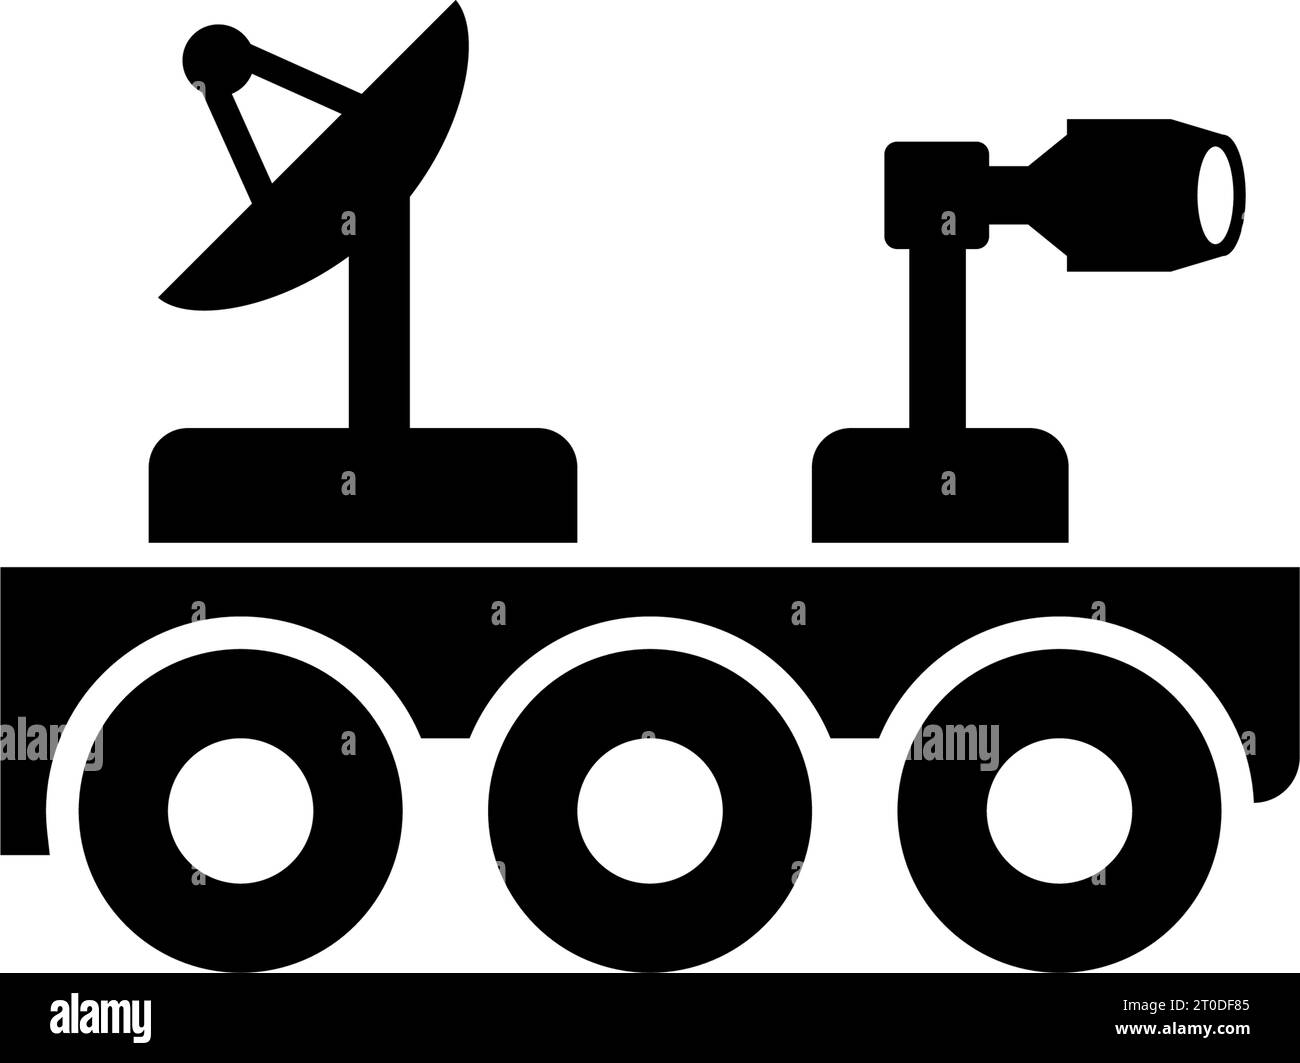 Moon Rover, Lunar Roving Vehicle, Robot. Flat Vector Icon illustration. Simple black symbol on white background. Moon Rover, Lunar Roving Vehicle sign Stock Vector